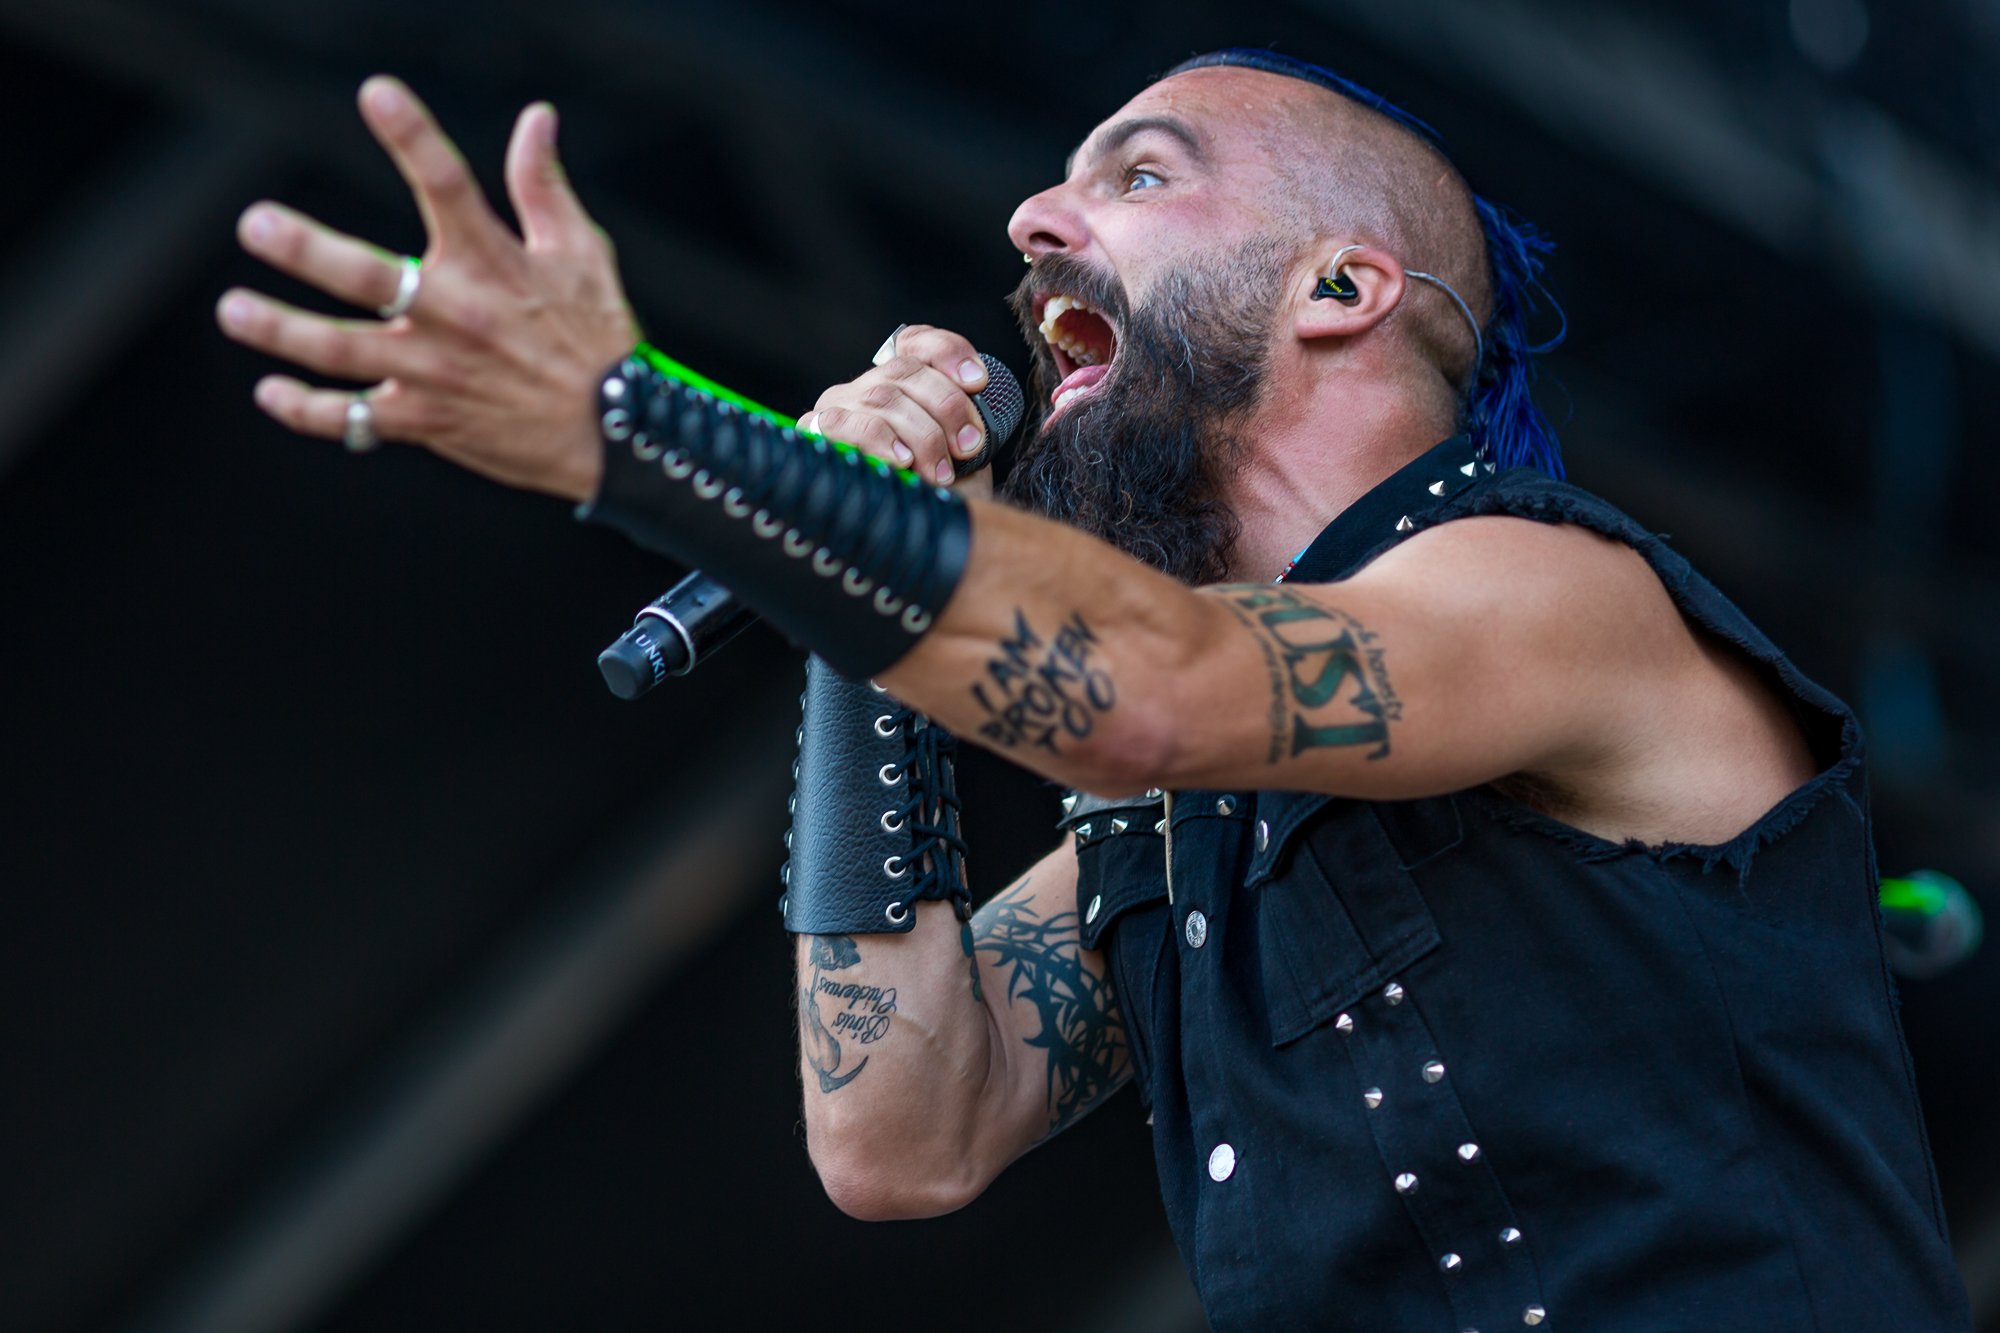 2019-07-27-Heavy-Montreal-Killswitch Engage-10